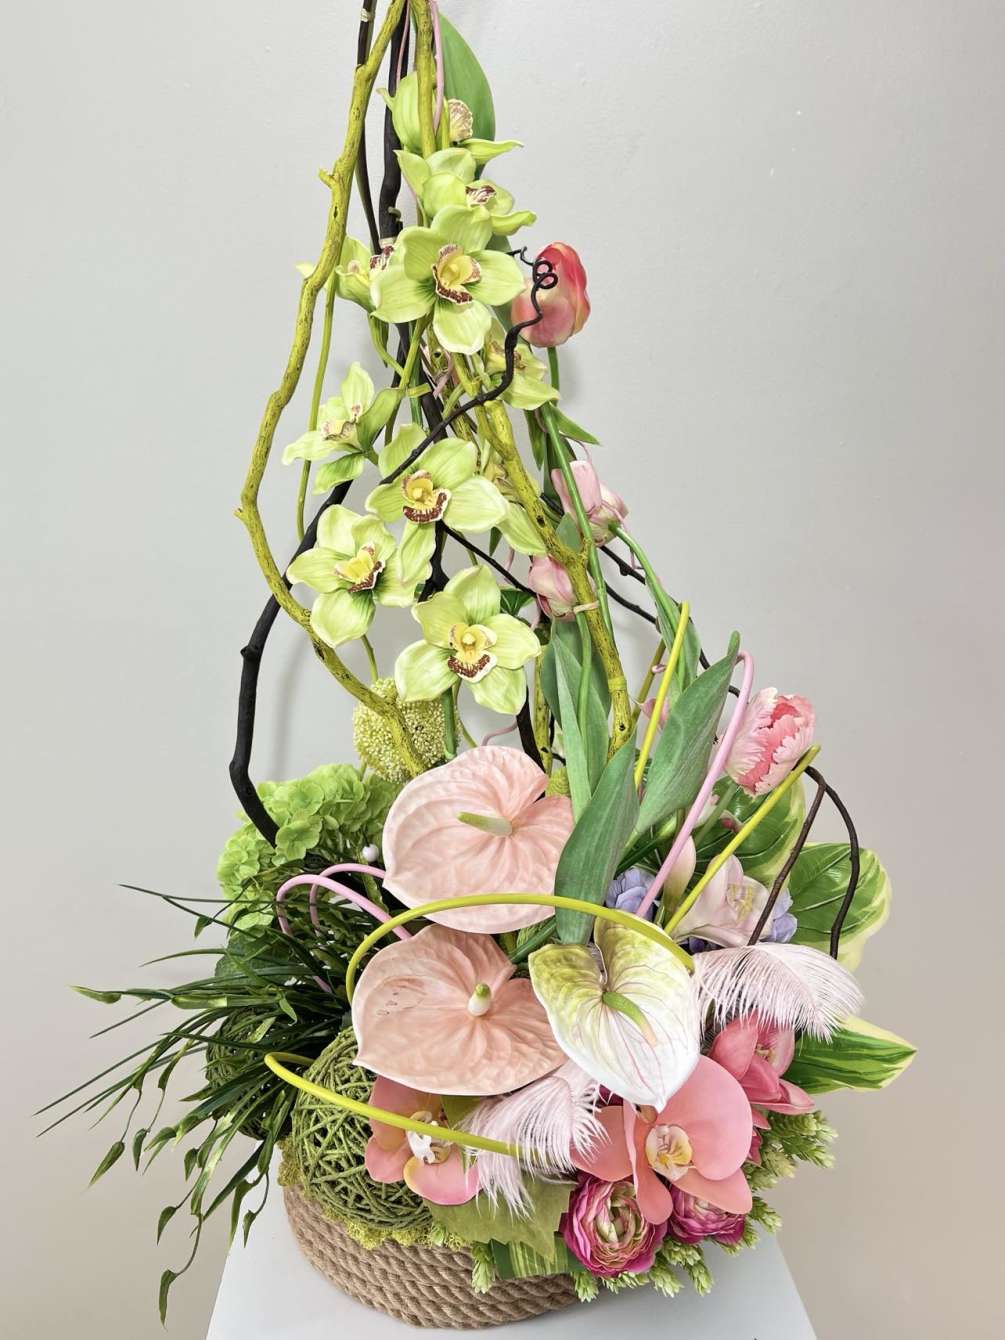 The delicate light pink hues of the tropical silk flowers evoke a